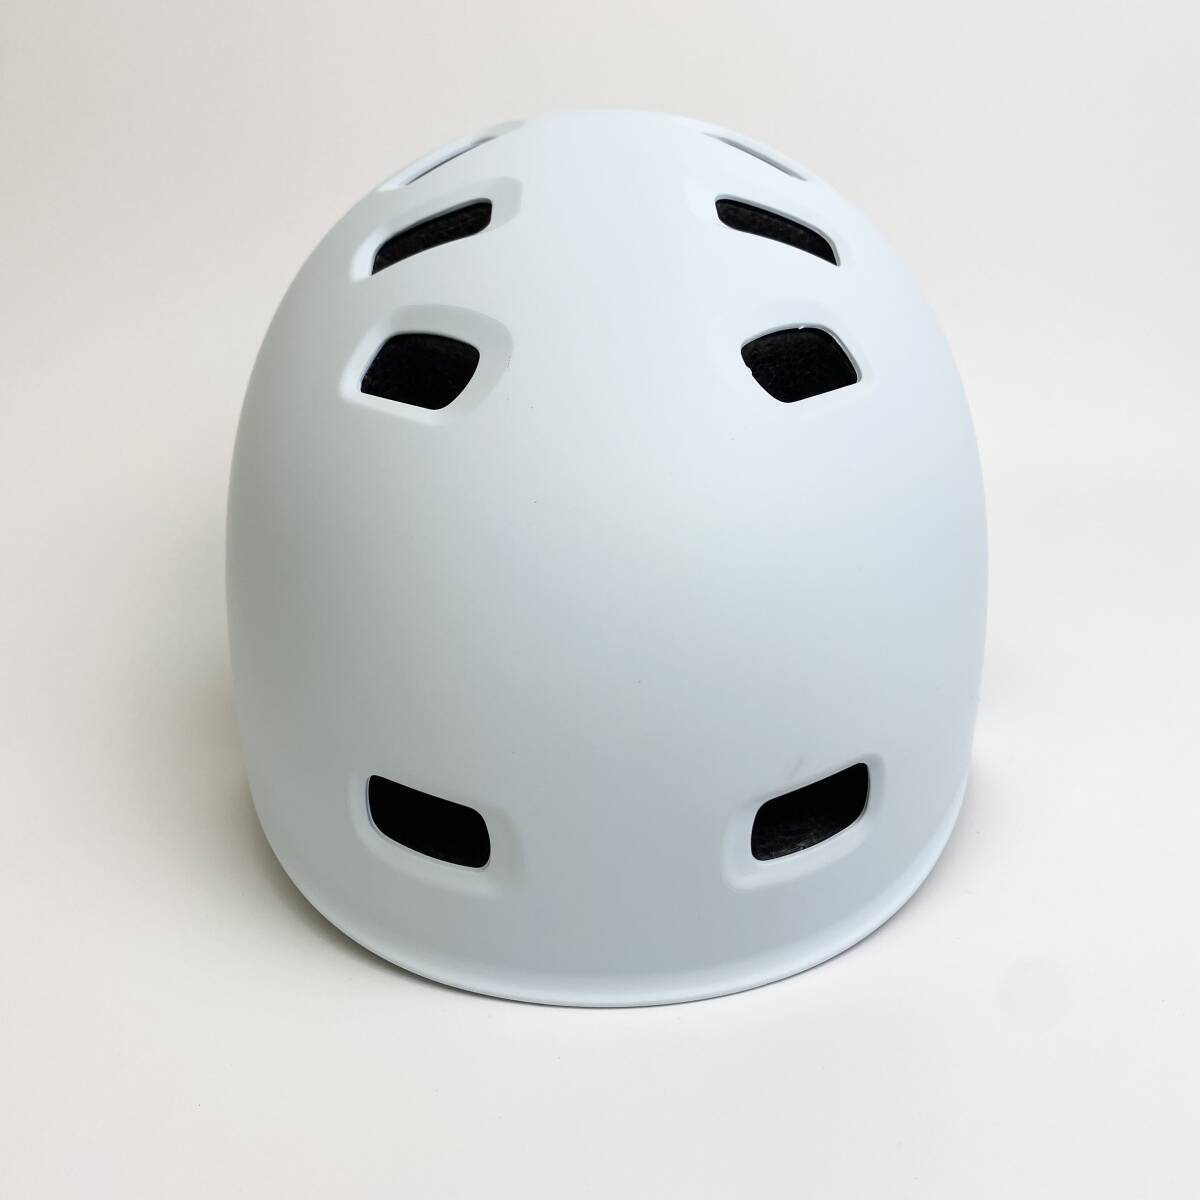 [1 jpy auction ] OutdoorMaster bicycle helmet sport CPSC safety standard ASTM safety standard child adult combined use TS01B001738